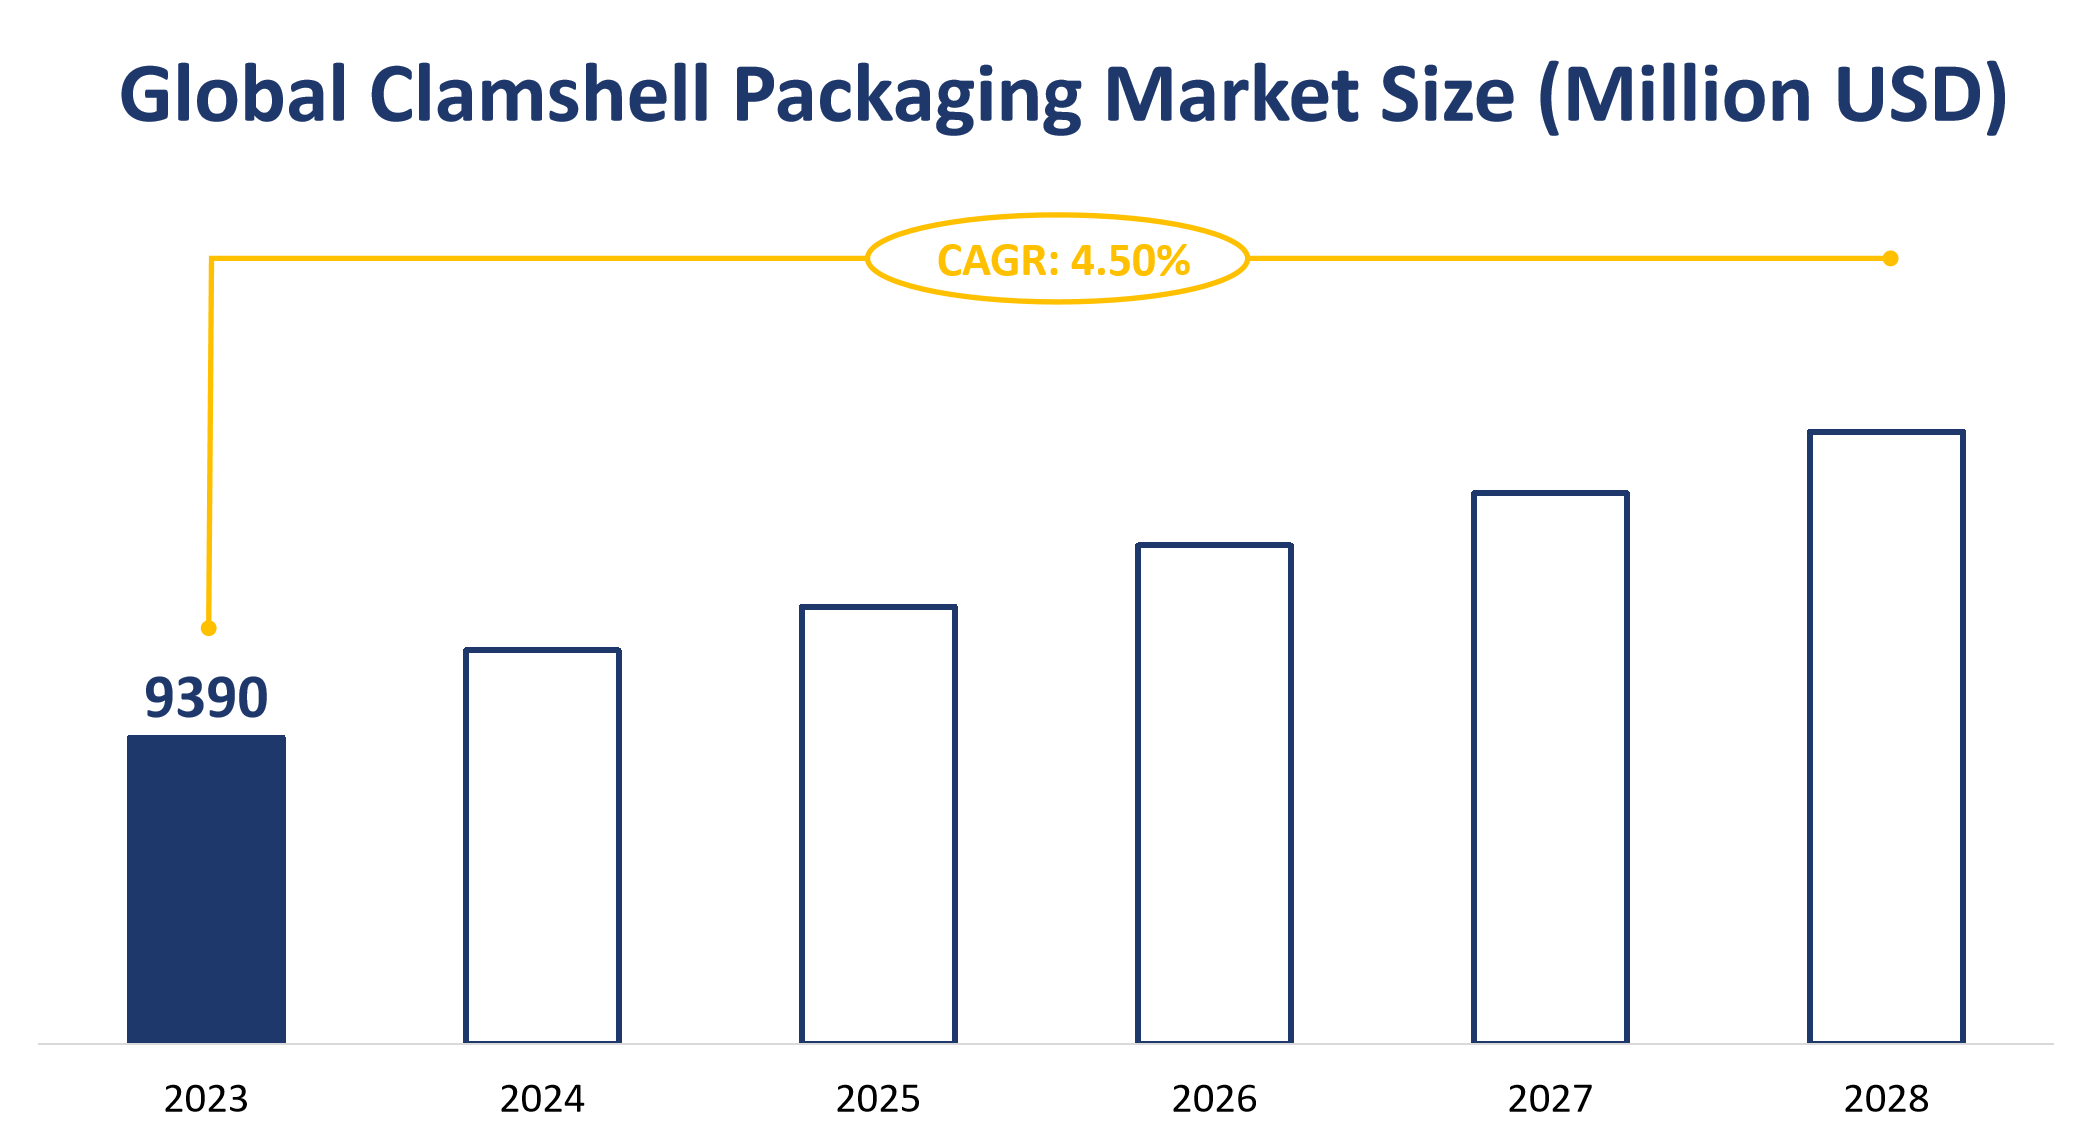 Global Clamshell Packaging Market Size (Million USD)